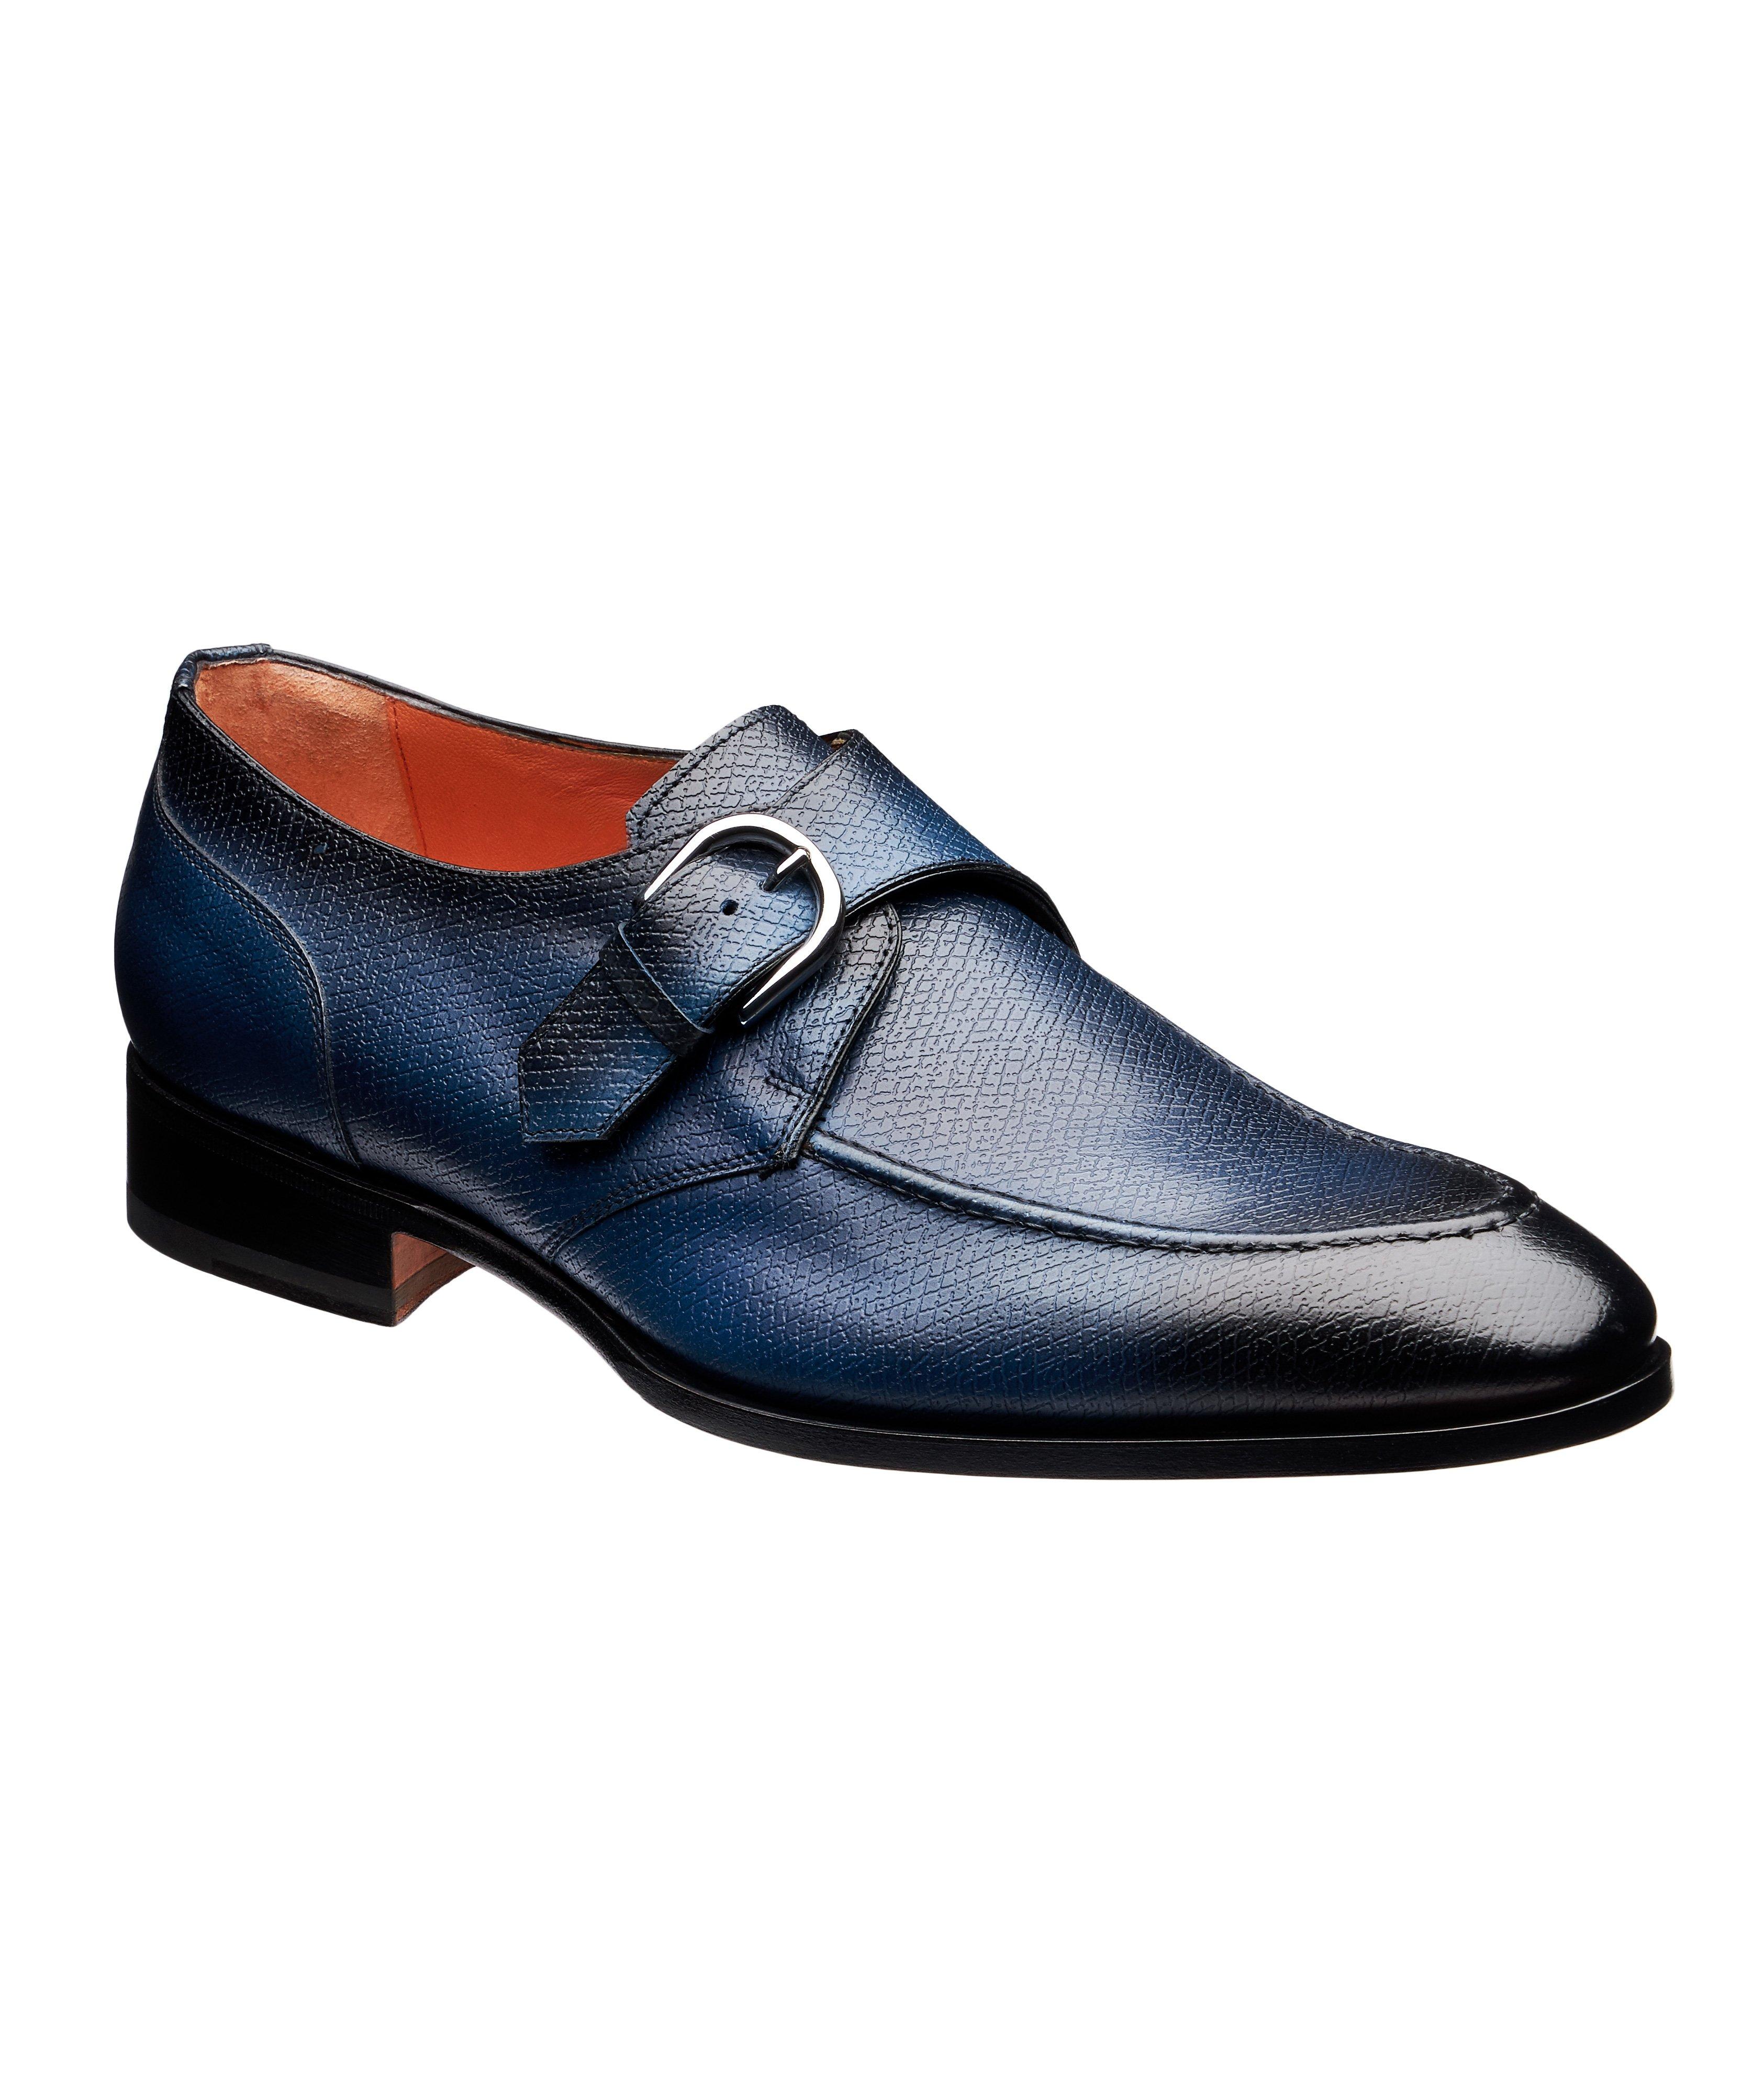 Textured Leather Monk-Straps image 0